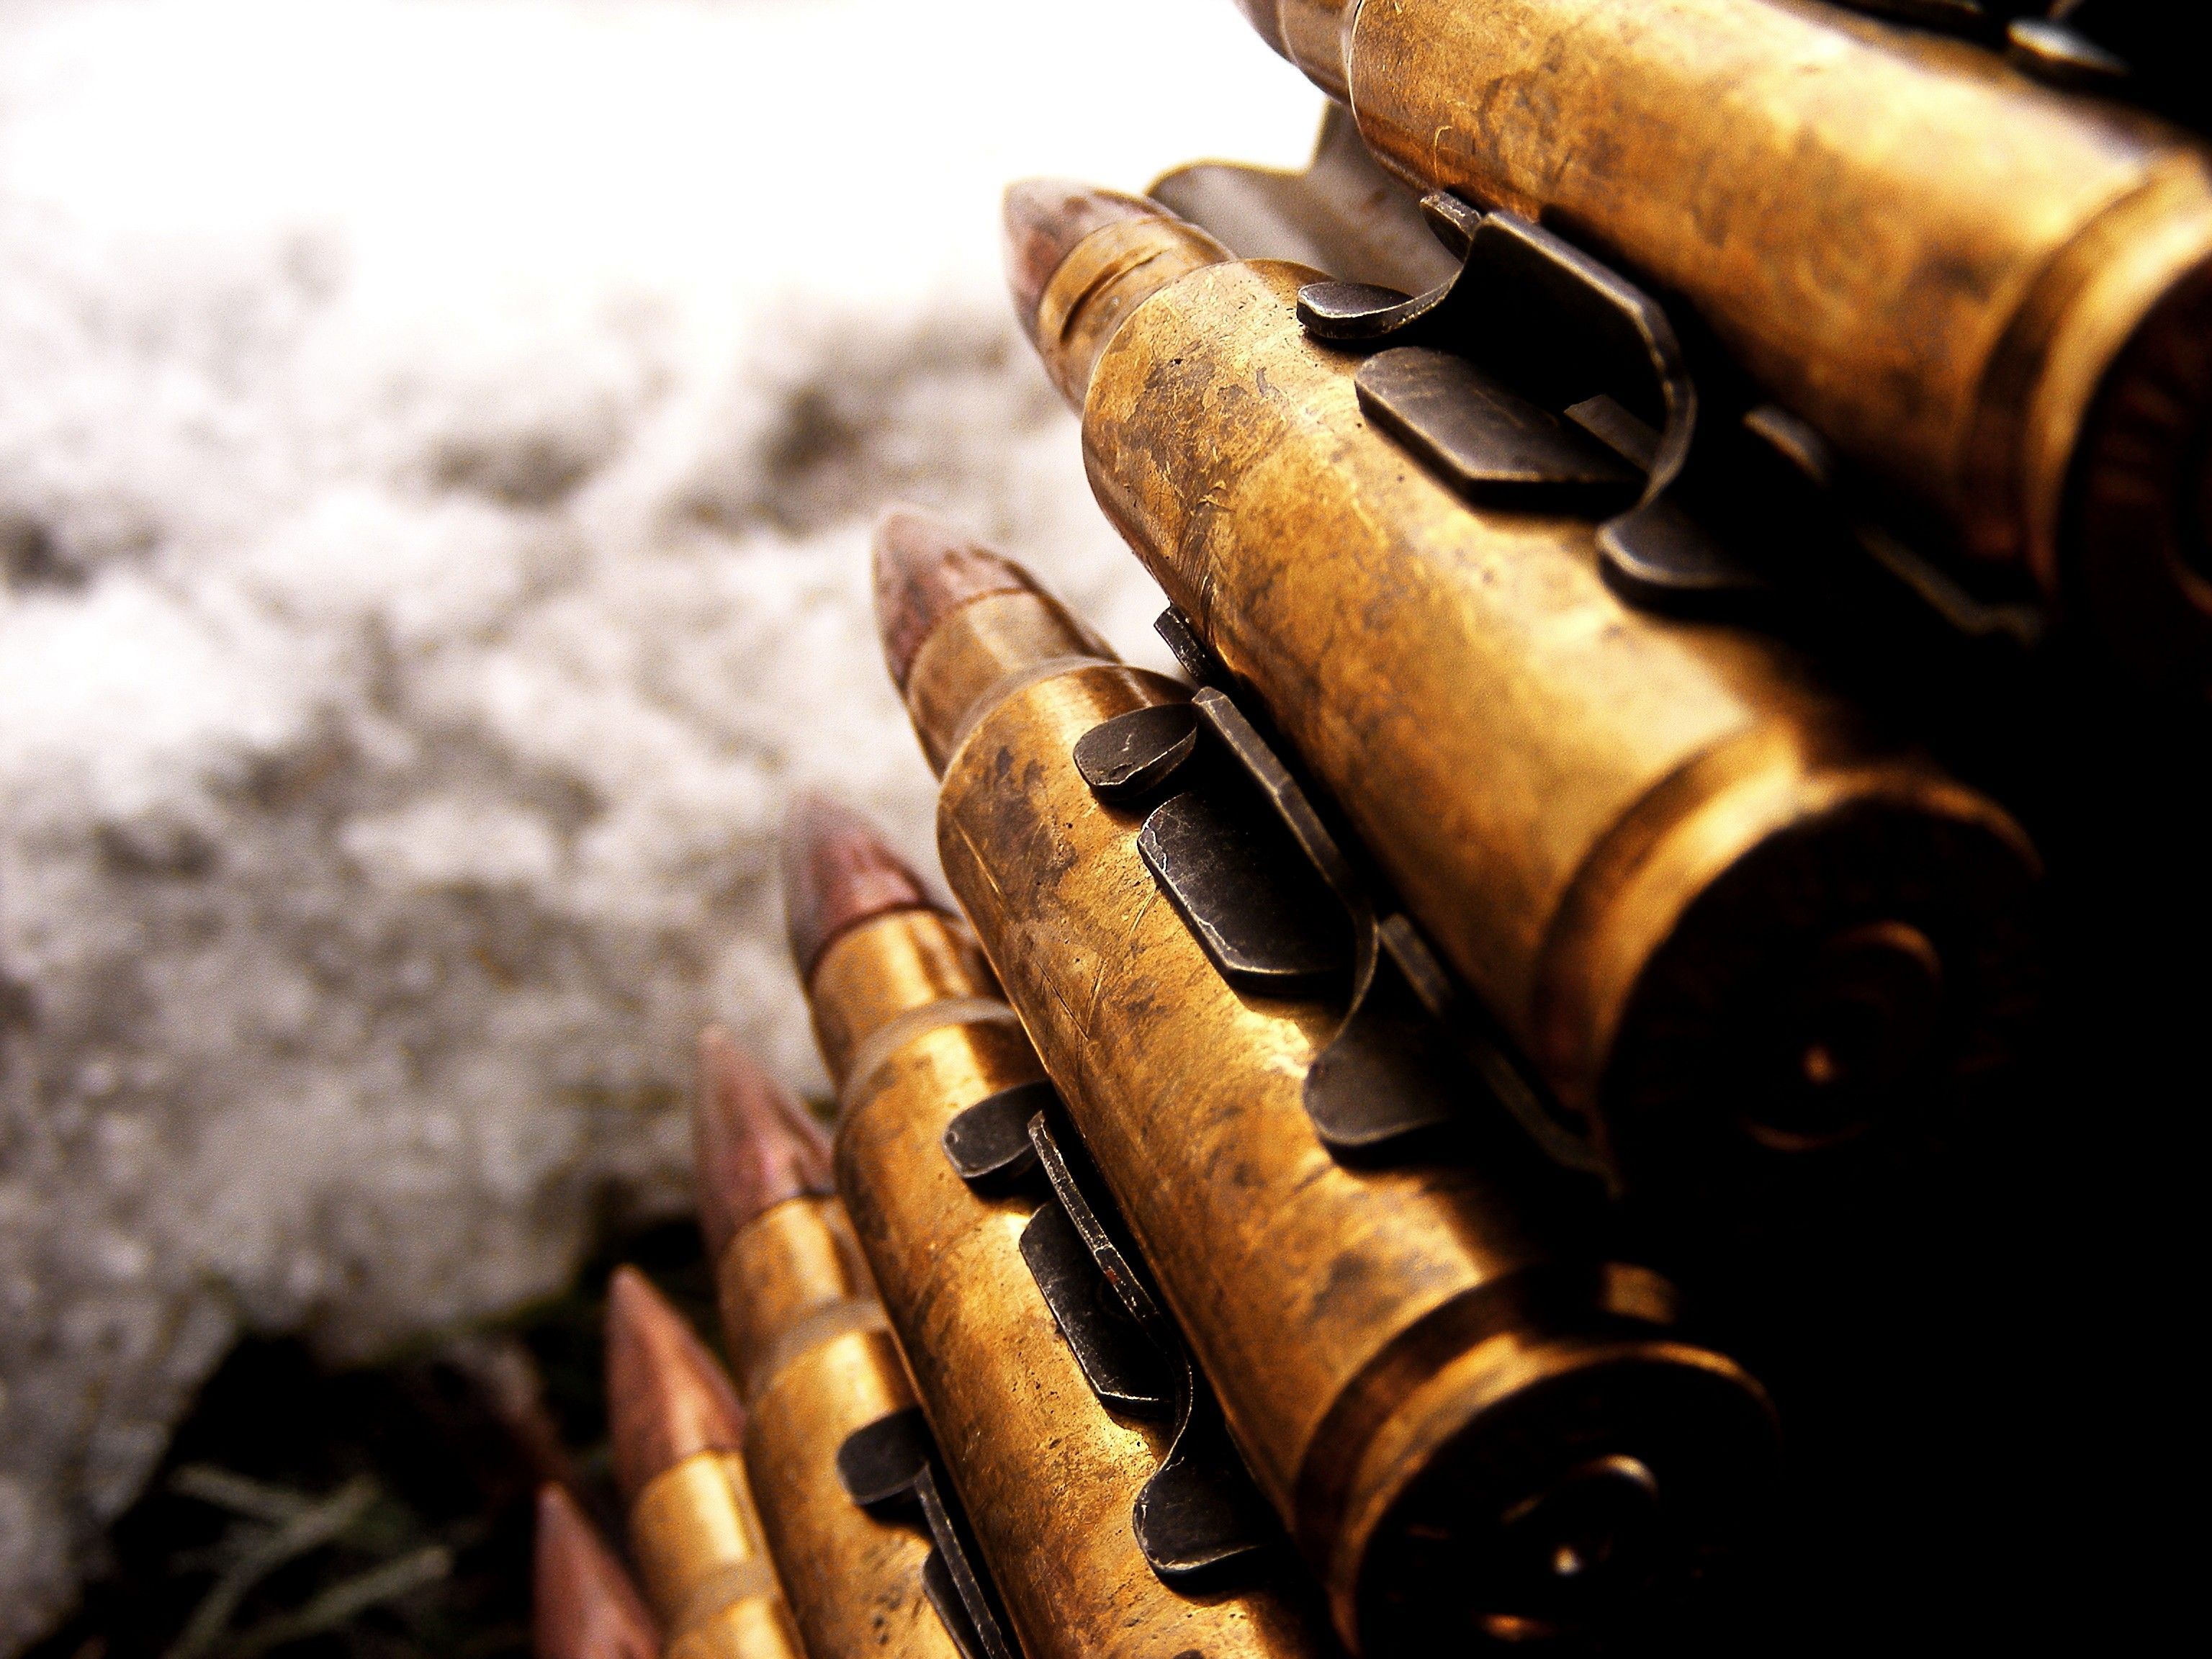 1959 Weapons HD Wallpapers | Backgrounds - Wallpaper Abyss